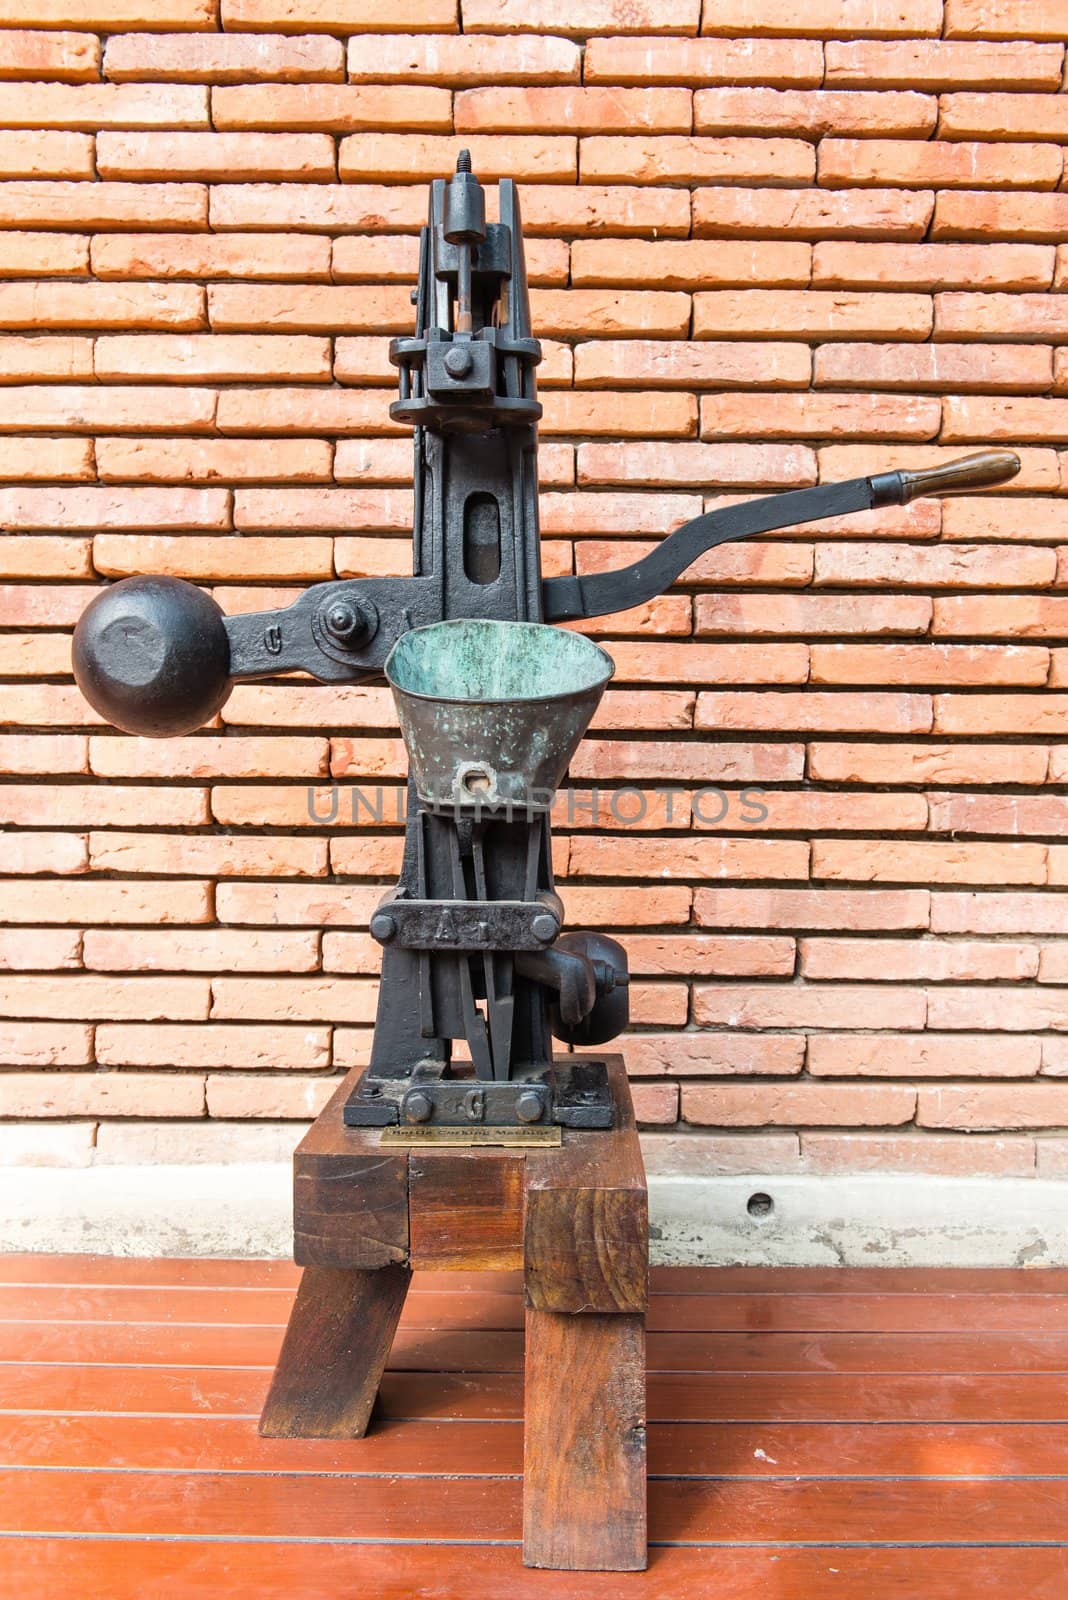 Vintage rusty steel and wooden wine bottle processing equipment, useful for background